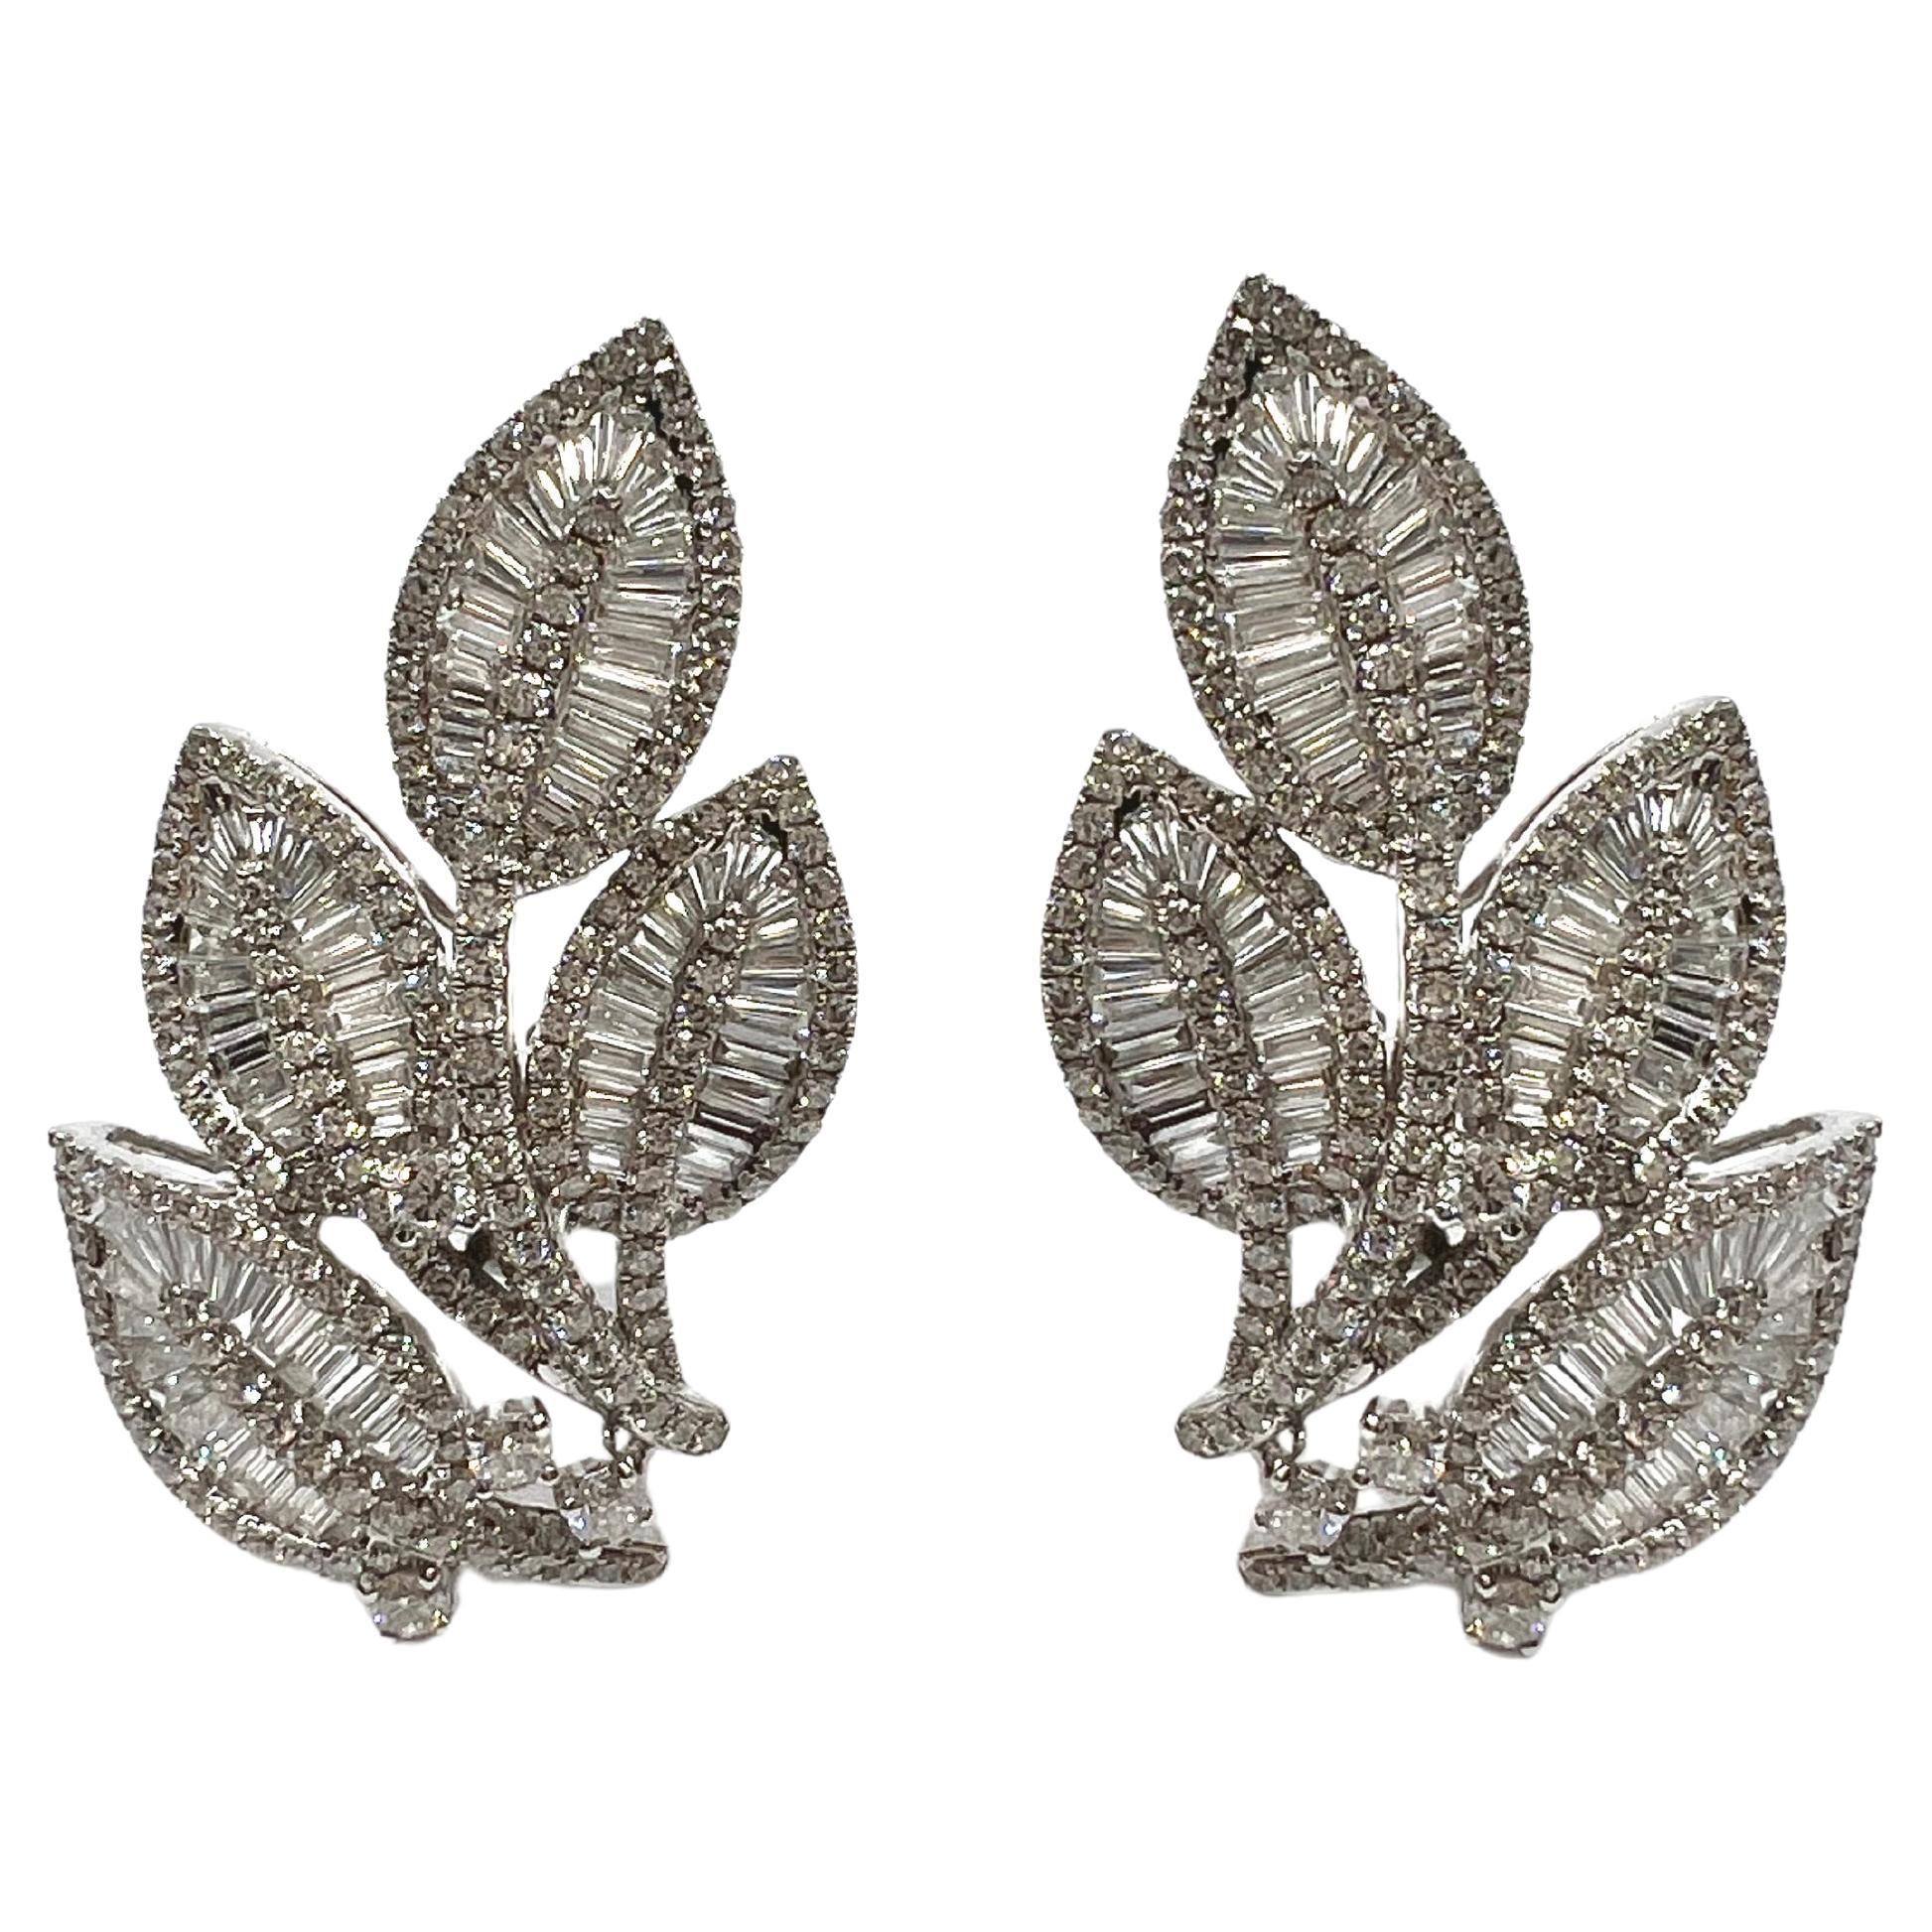 Leaves earrings diamonds paved (6 carats) set on white gold. 